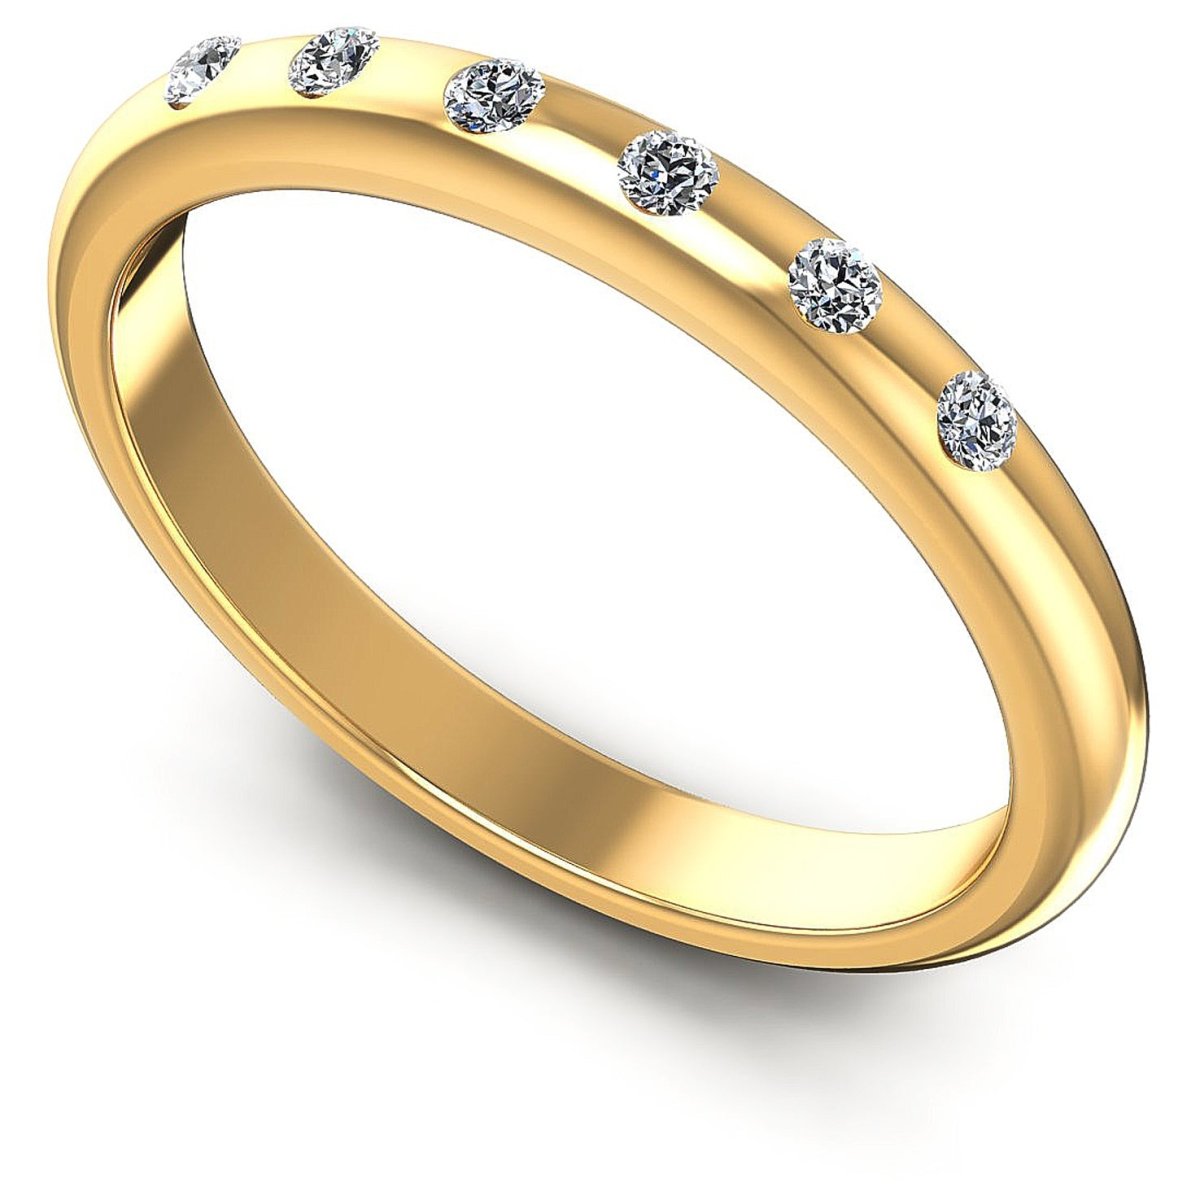 Special 0.10CT Round Cut Diamond Wedding Band in 14KT Yellow Gold - Primestyle.com